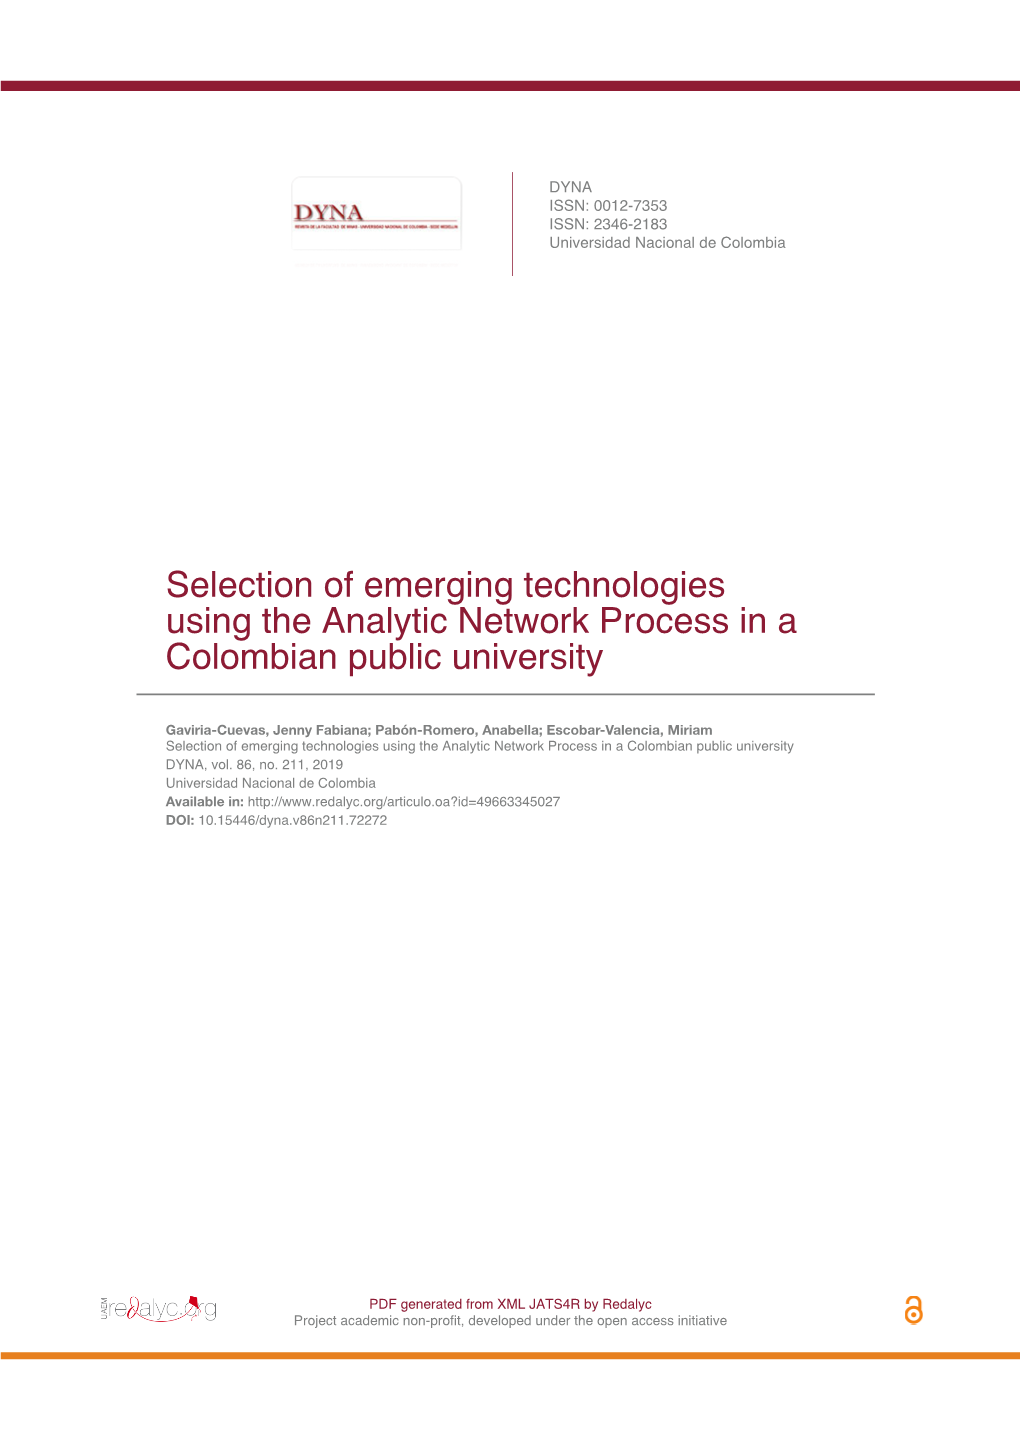 Selection of Emerging Technologies Using the Analytic Network Process in a Colombian Public University